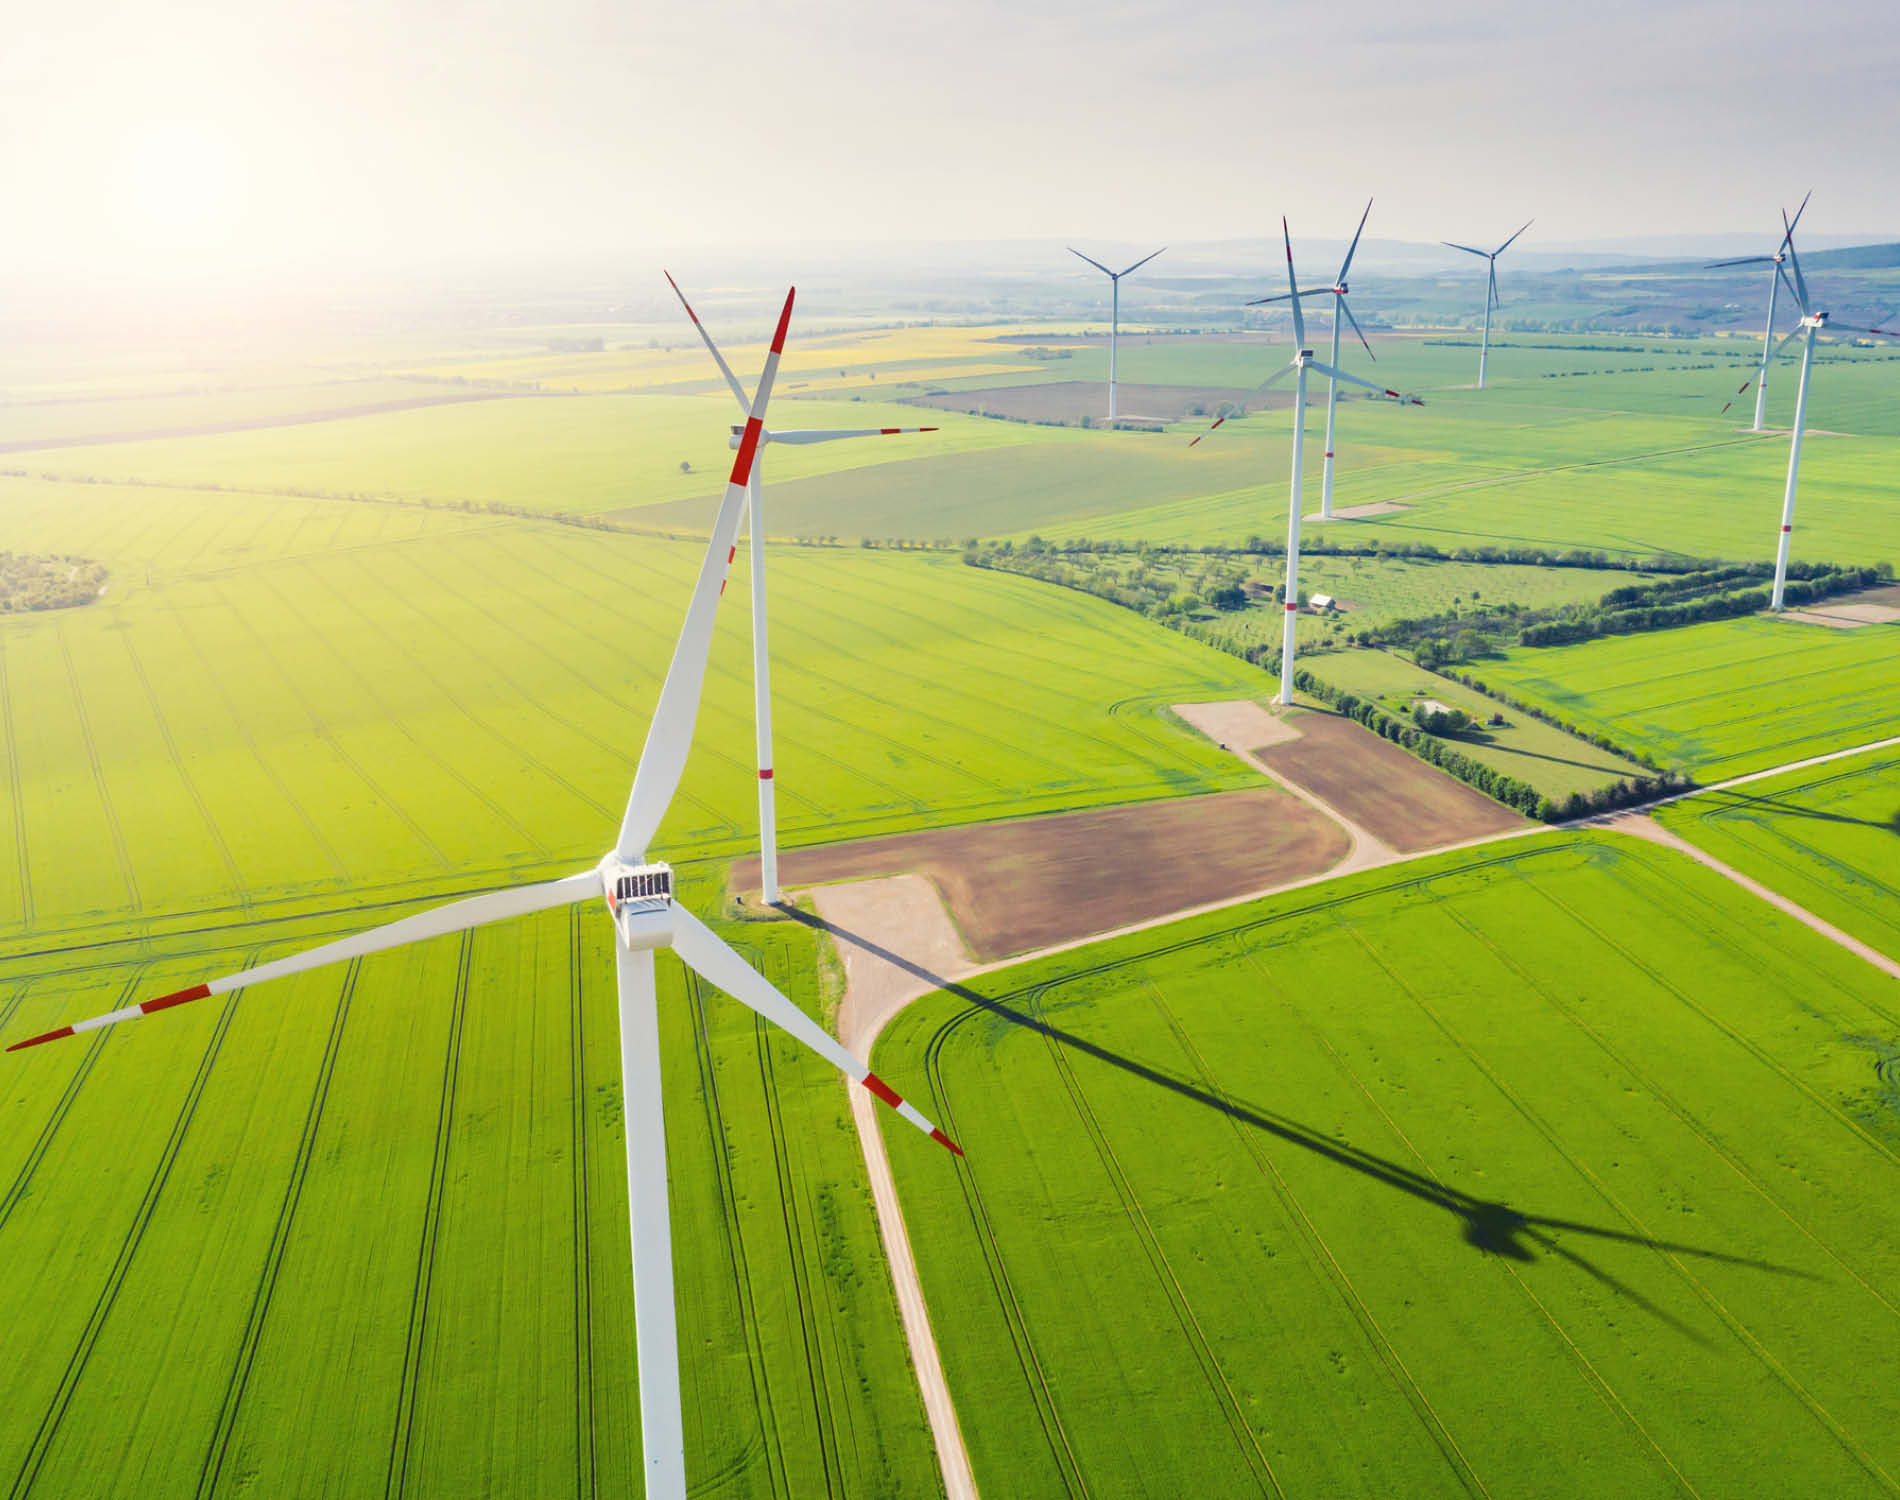 /-/media/images/website/background-images/industry-sectors/energy/energy_wind_istock-1224821300.ashx